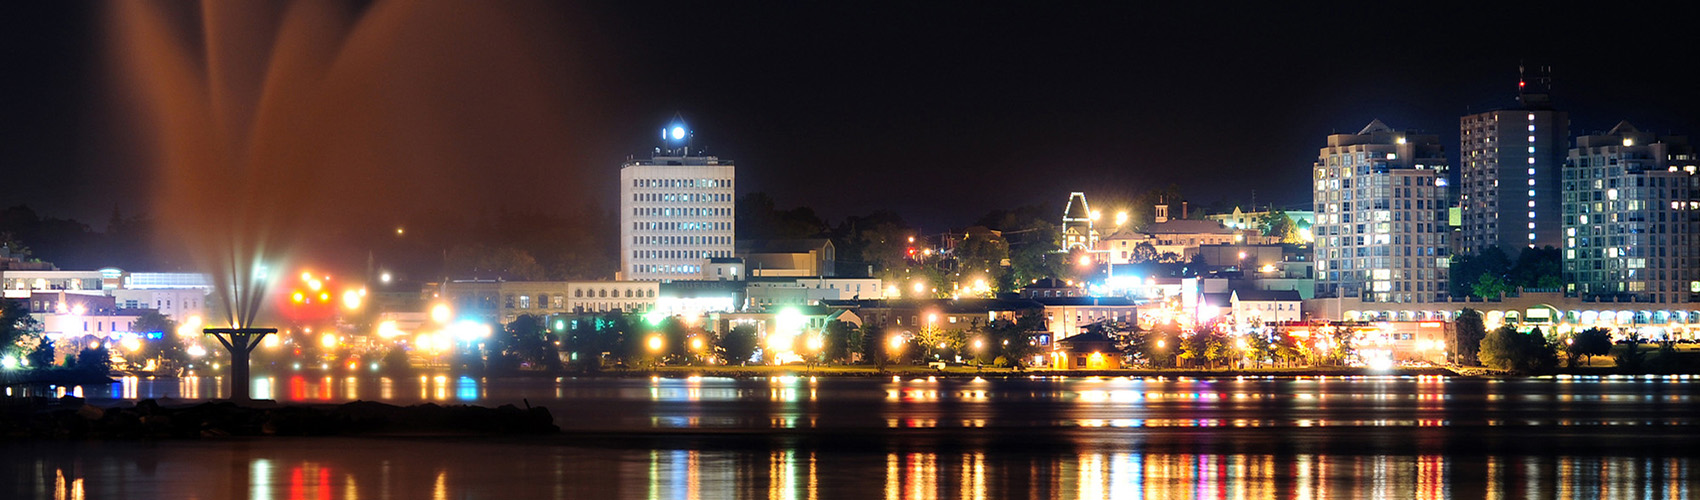 A view of the City of Barrie skyline, lit up at night, with Lake Simcoe in the foreground